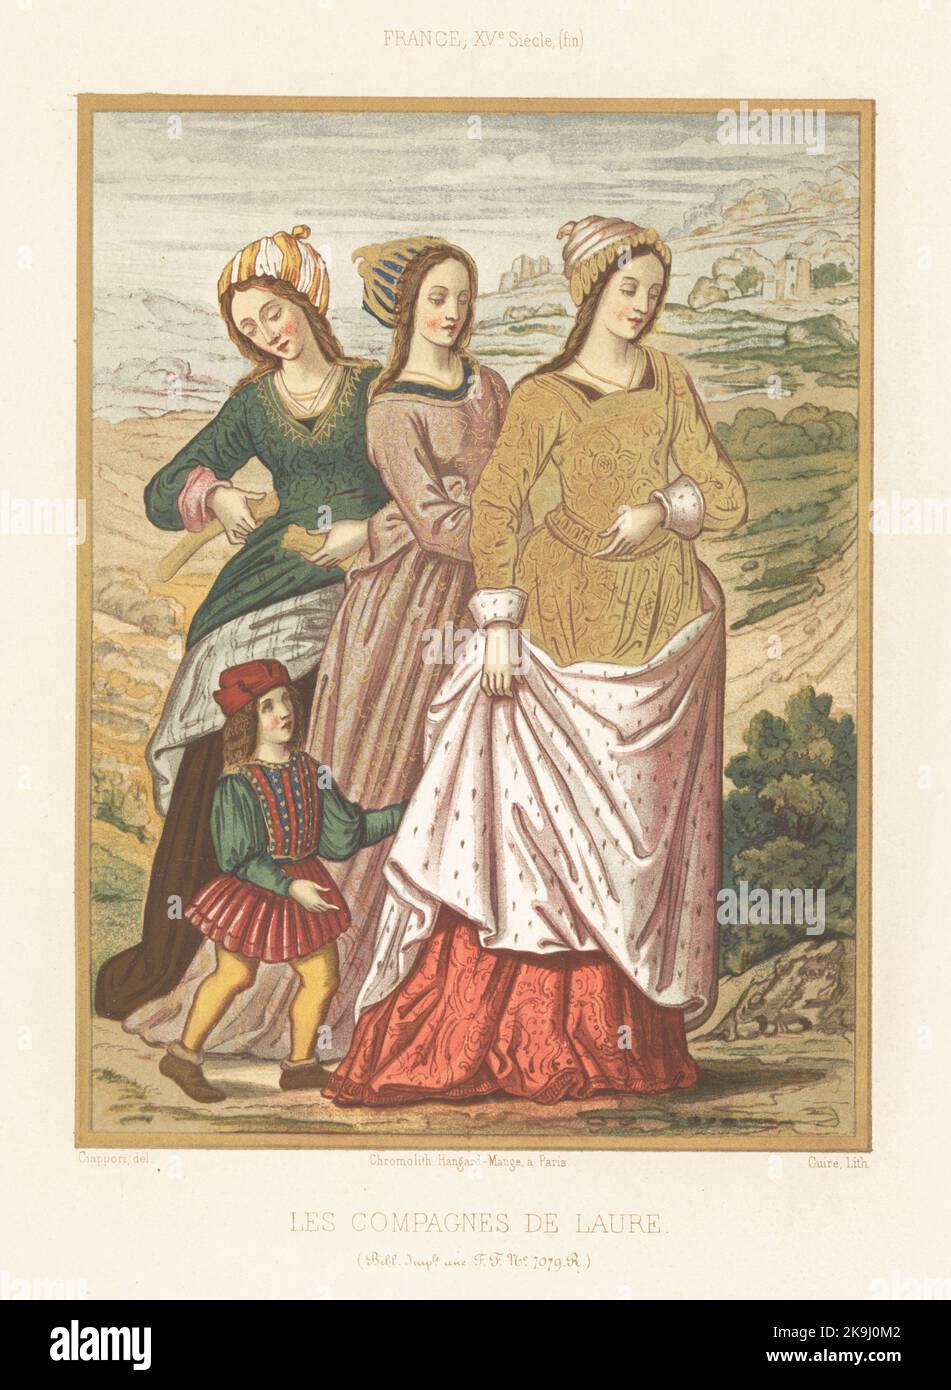 The companions of Laura. Three chaste women and a boy in French costumes of the late 15th century. Les compagnes de Laure, France, XVe siecle (fin). Taken from an illustrated manuscript of Petrarch's Triumphs, Les Triomphes, anc. F.F. MS 7079 R (Folio 102r, Francais 594), 1500, Bibliotheque Imperiale. Chromolithograph by Giare after an illustration by Claudius Joseph Ciappori from Charles Louandre’s Les Arts Somptuaires, The Sumptuary Arts, Hangard-Mauge, Paris, 1858. Stock Photo